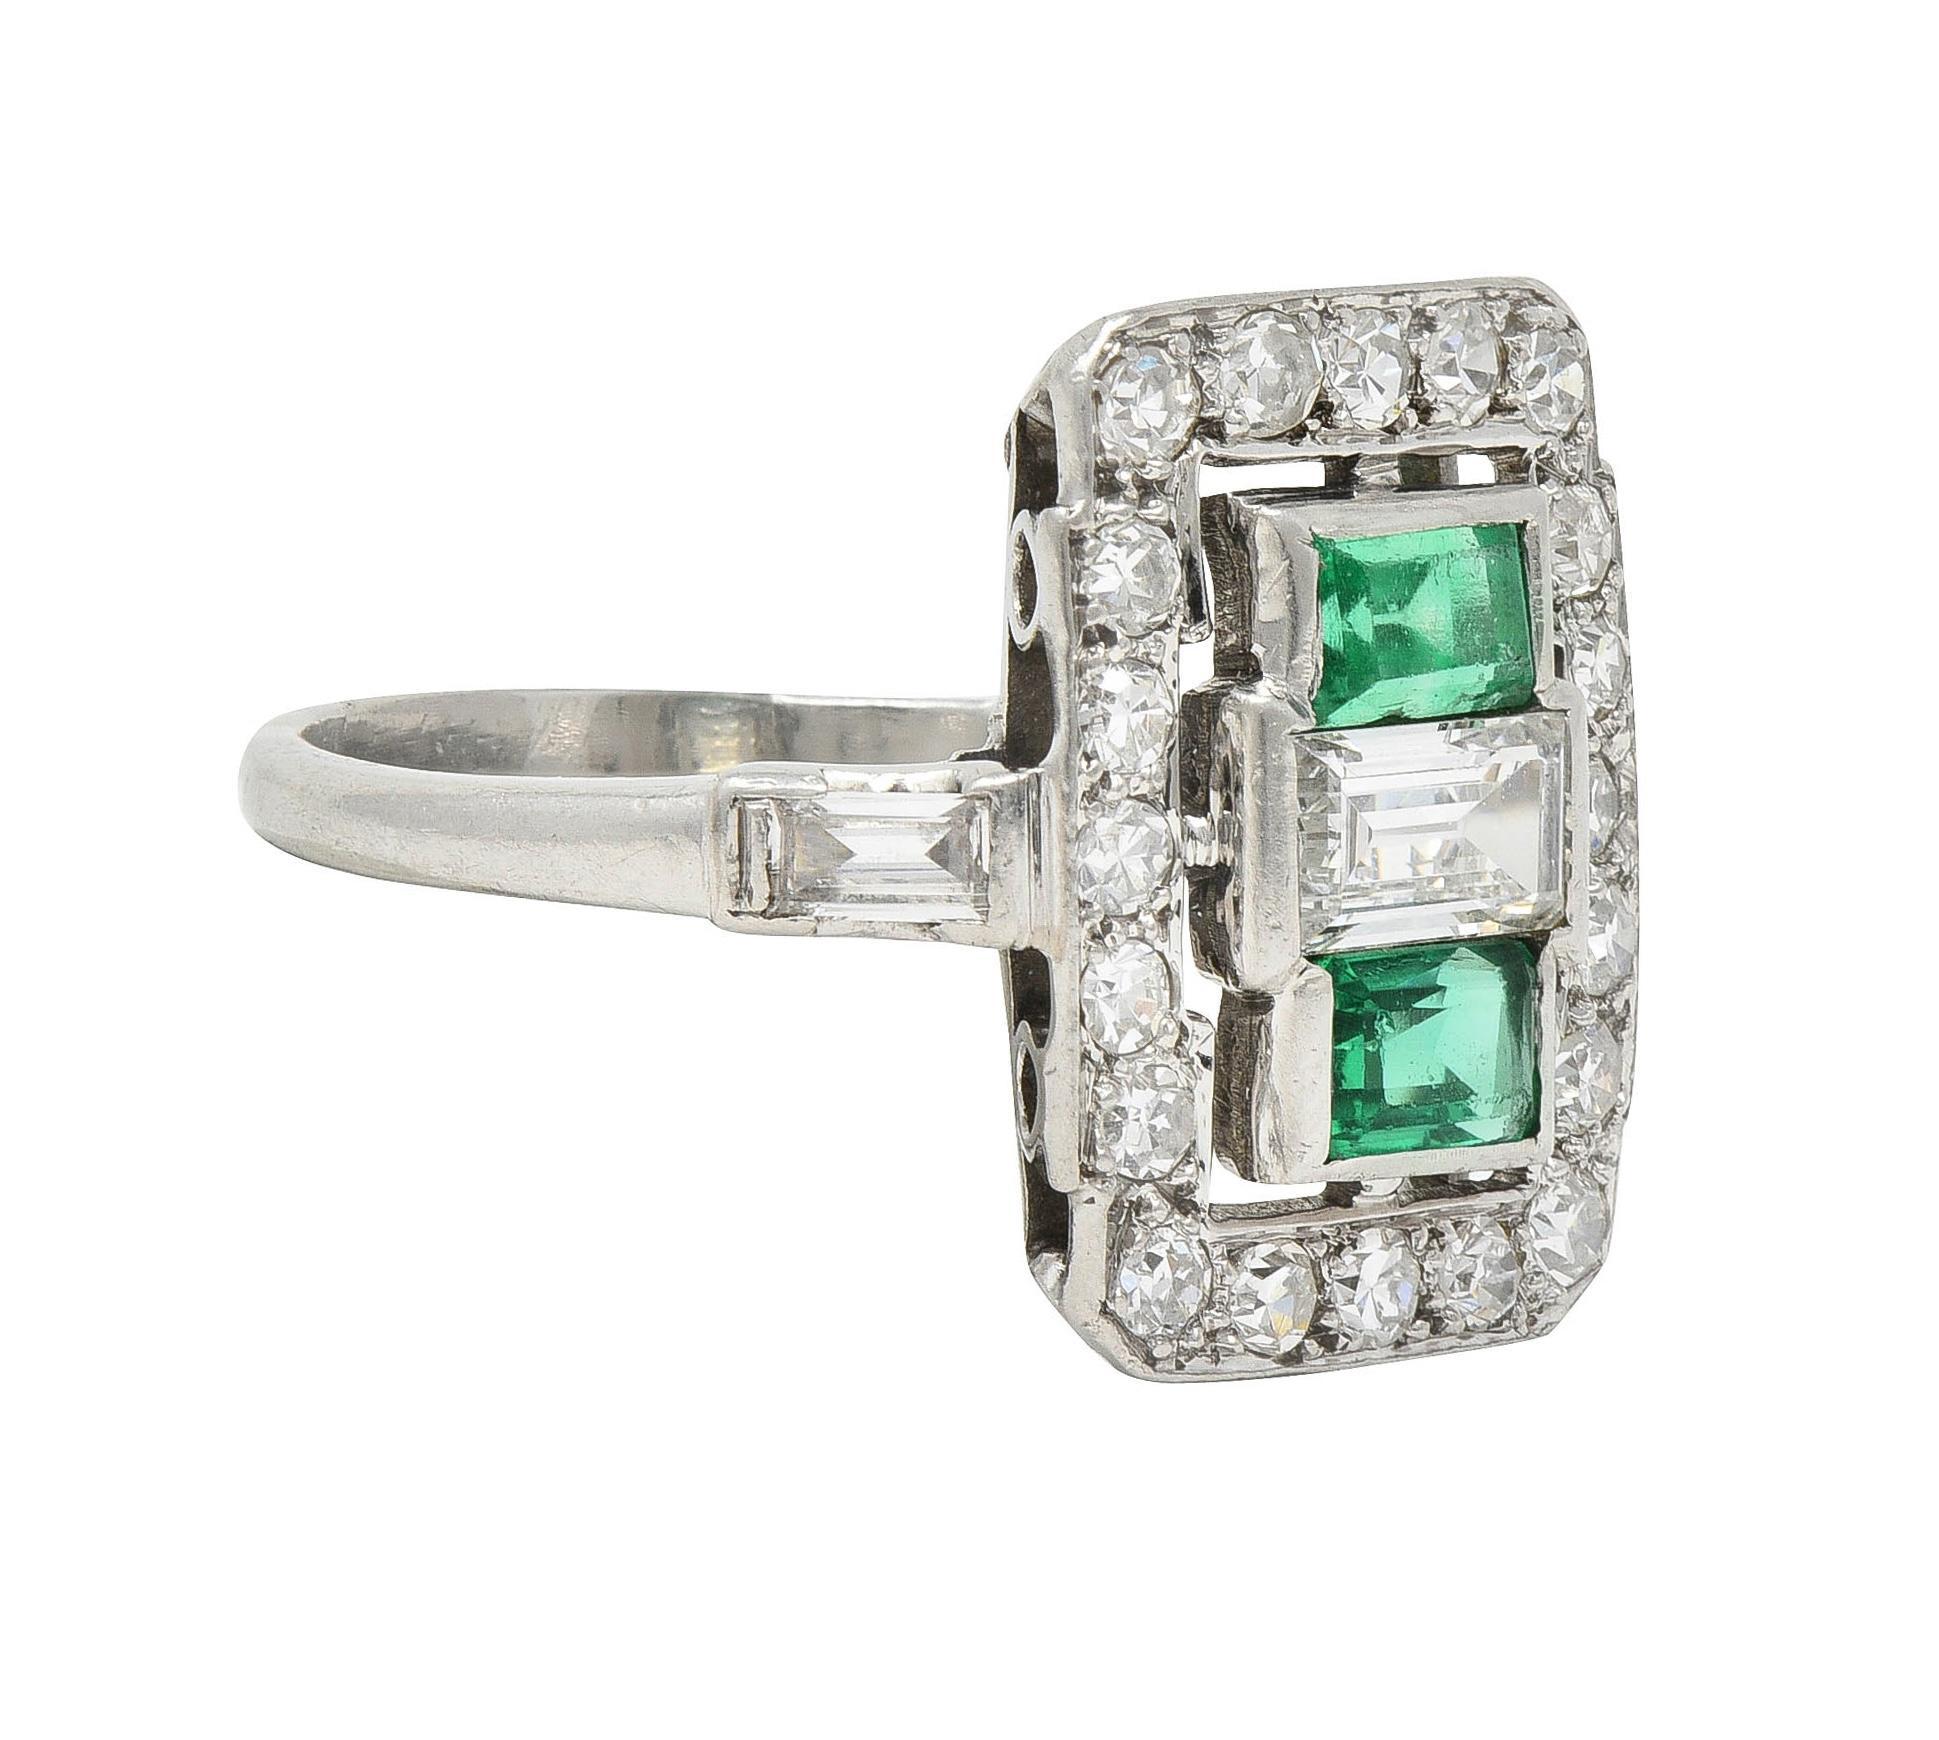 Designed as a rectangular form centering a baguette cut diamond weighing approximately 0.30 carat
G color with VS2 clarity - bar set and flanked north to south by emerald cut emeralds
Weighing approximately 0.55 carat total - transparent medium